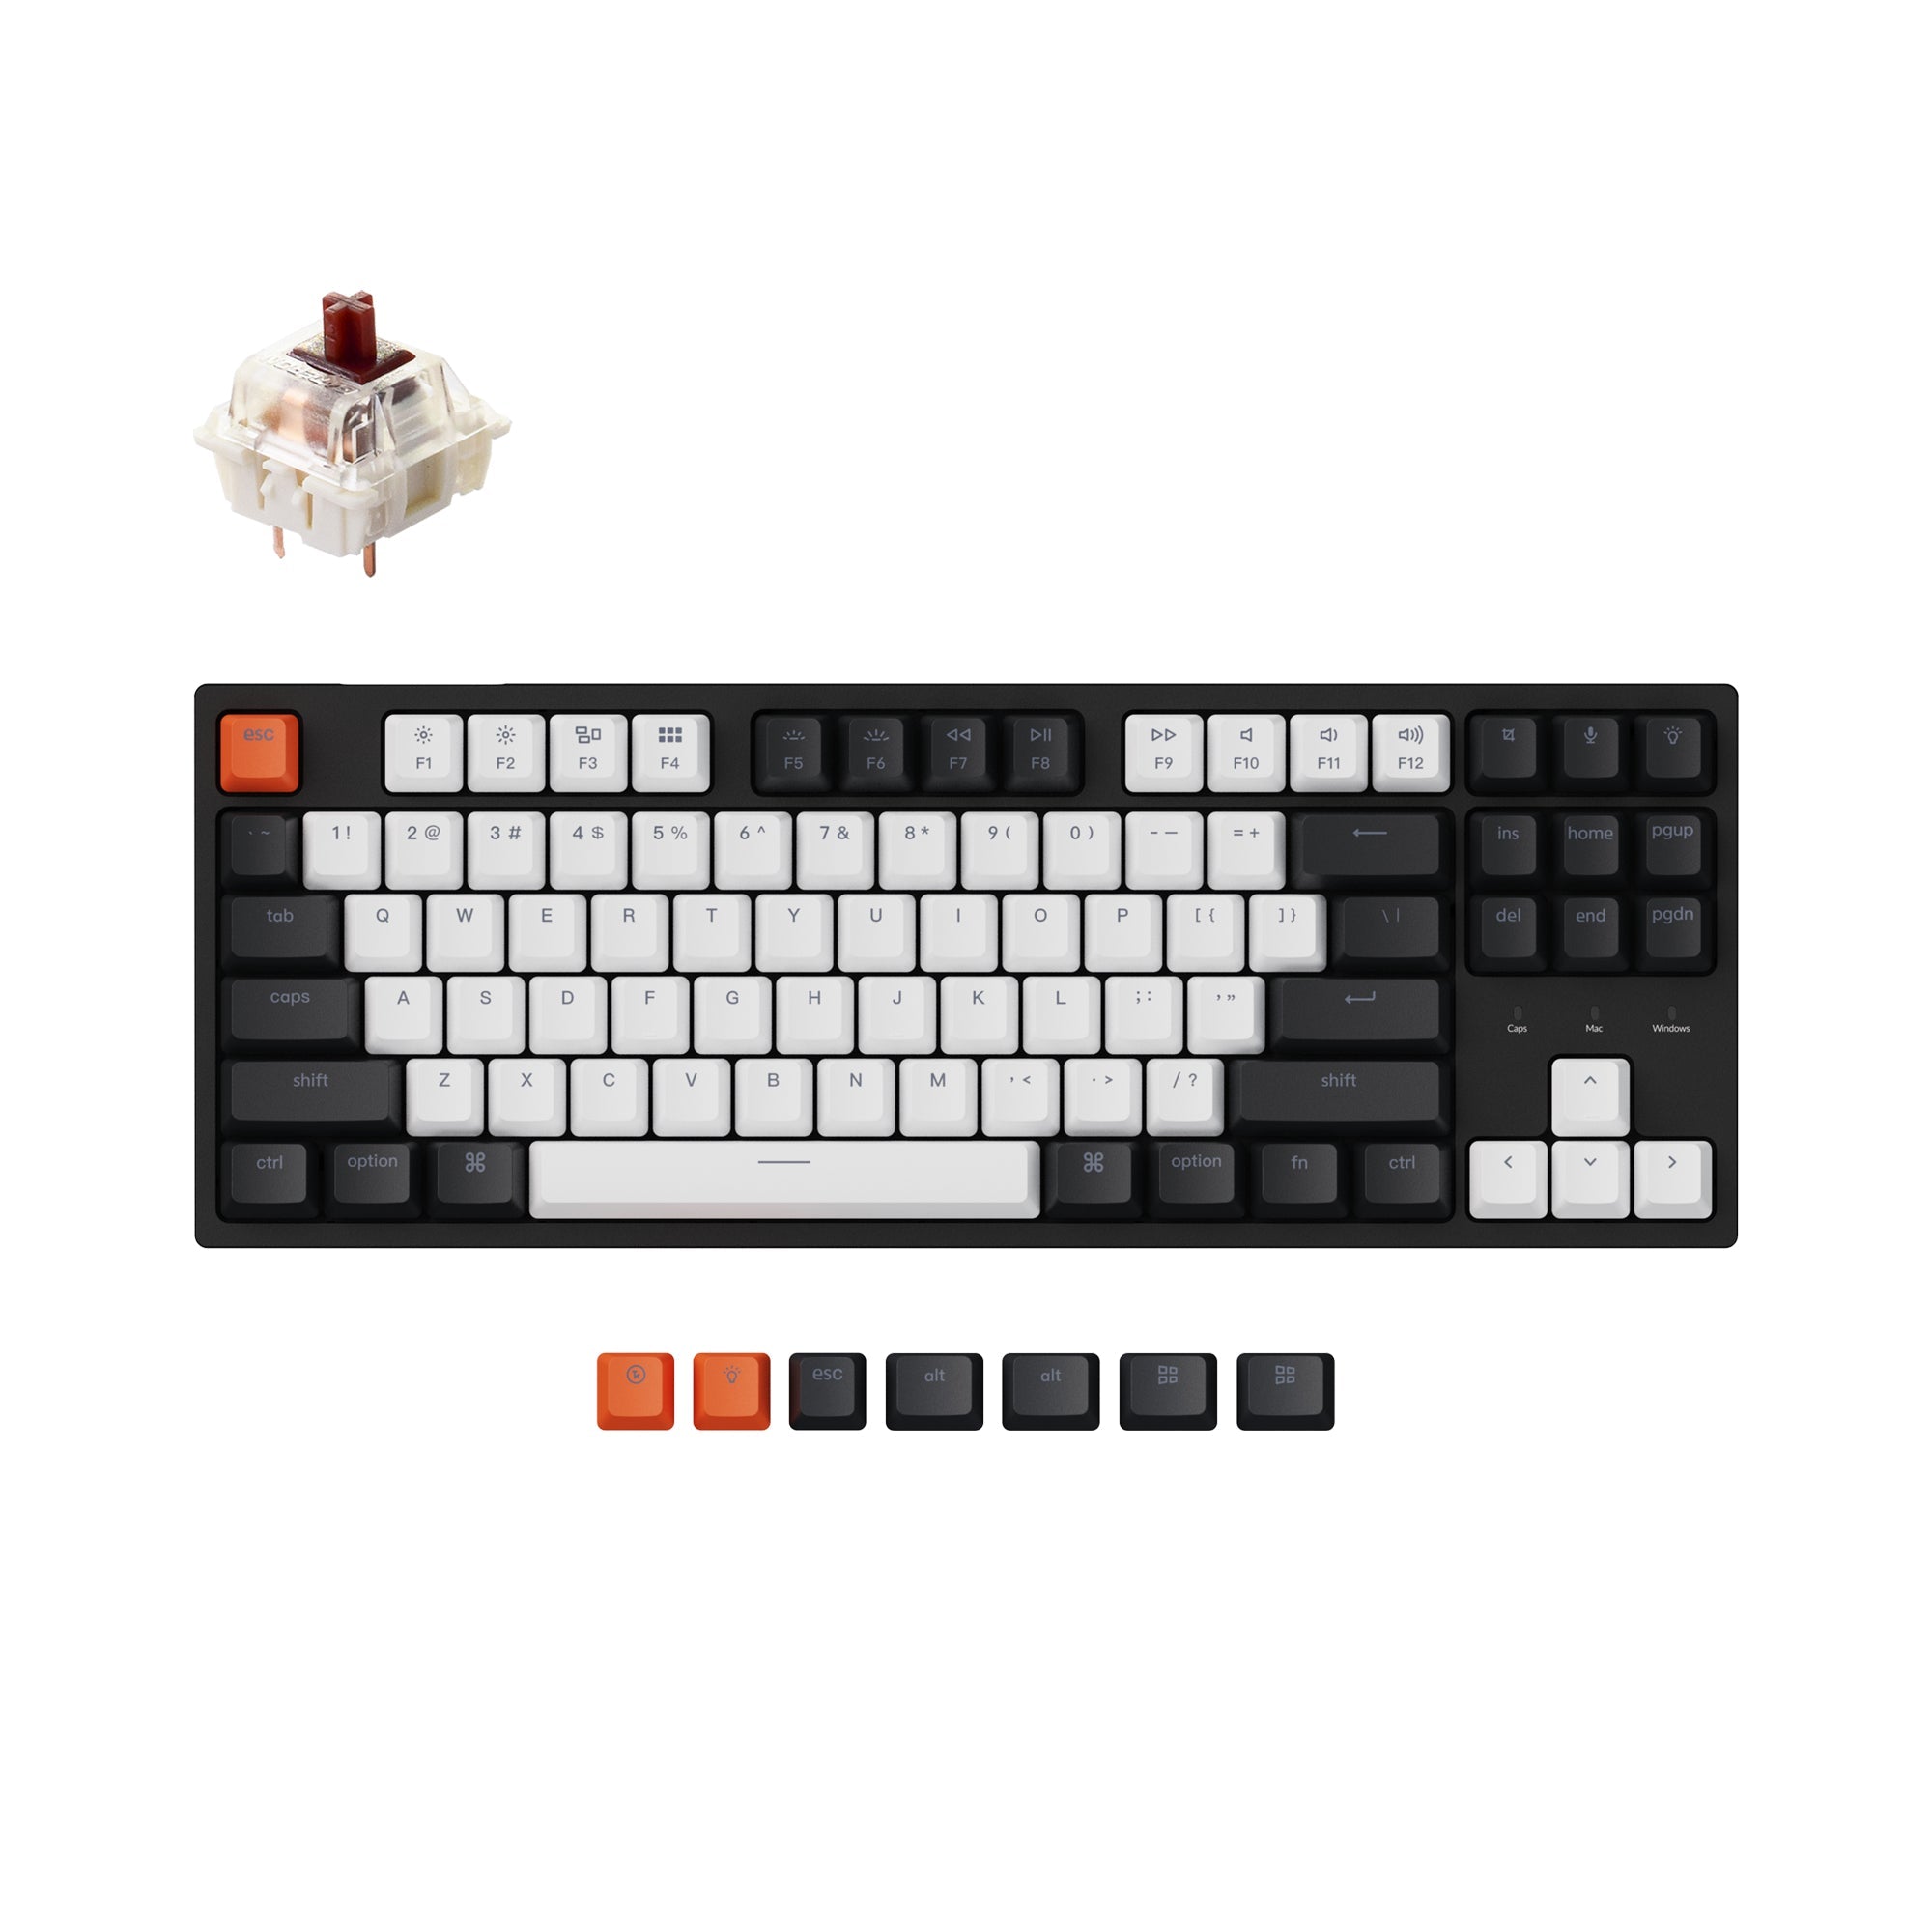 Keychron C1 hot swappable wired type c mechanical keyboard tenkeyless layout for mac windows ios Gateron switch brown